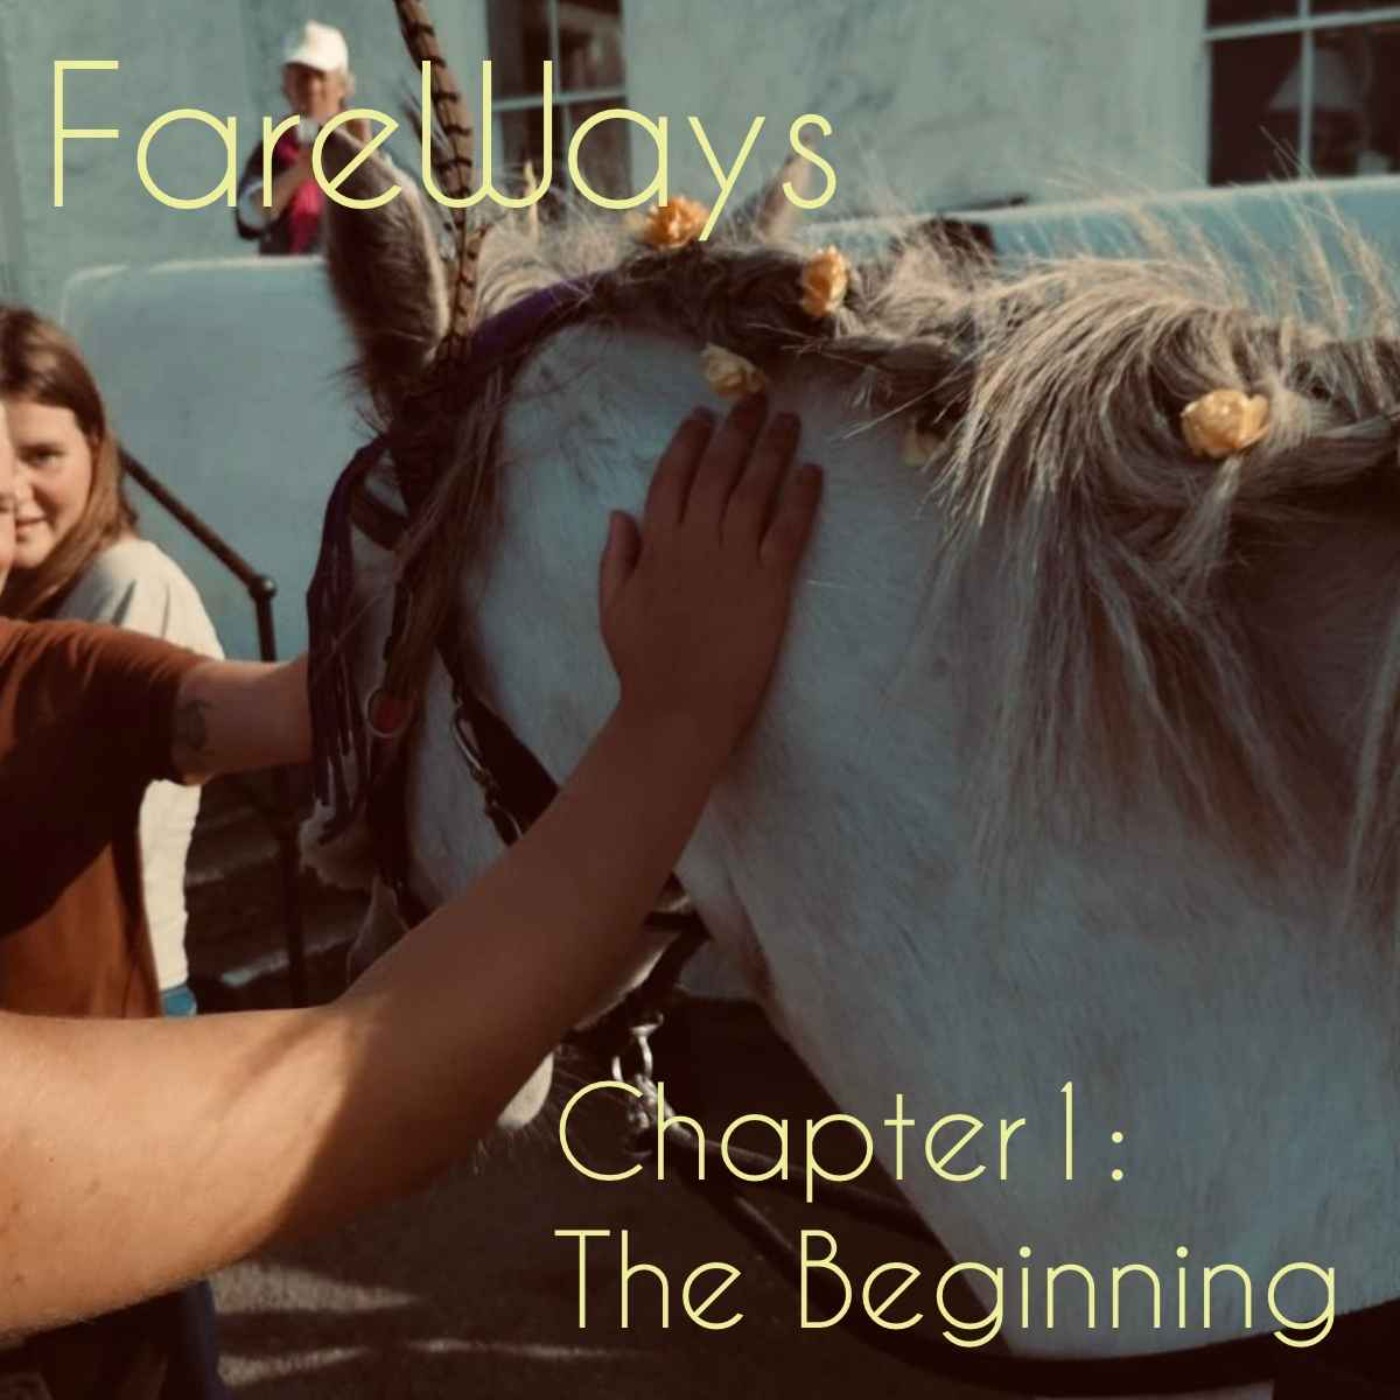 cover art for FareWays Chapter 1: The Beginning